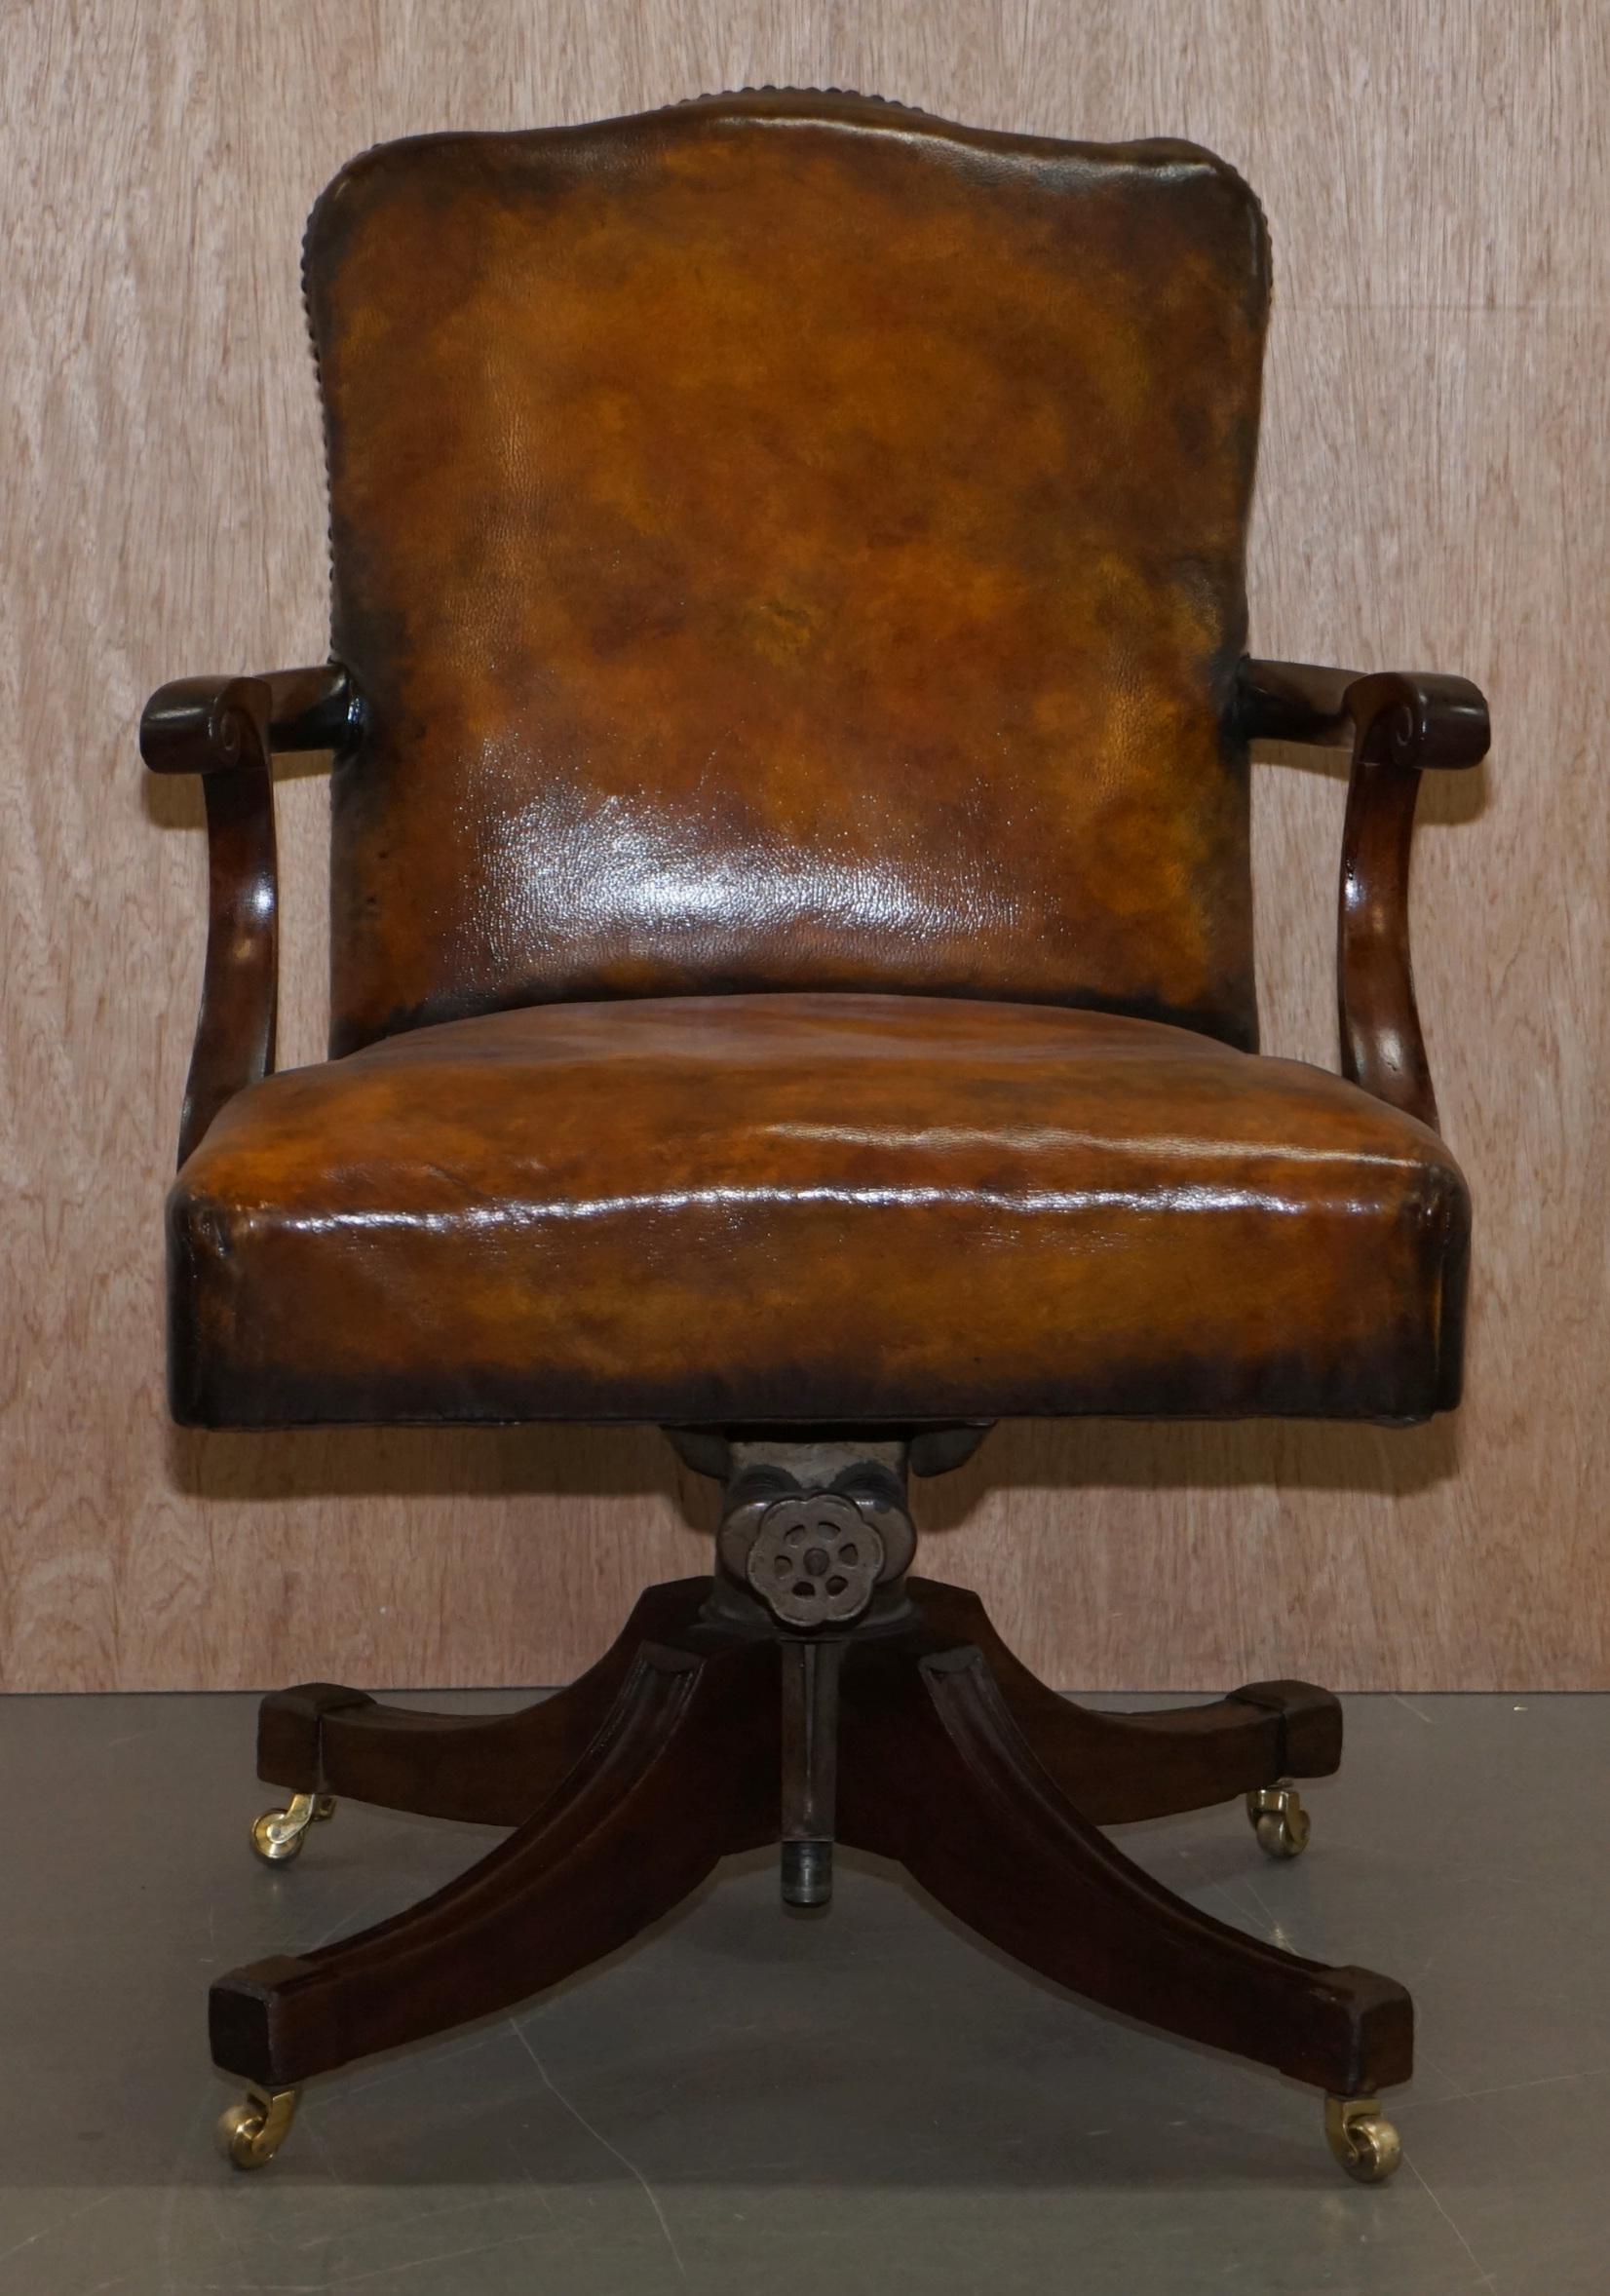 We are delighted to offer for sale this stunning original Victorian stamped Maple & Co fully restored mahogany framed Hillcrest base office chair with hand dyed brown leather upholstery

A stunning piece, the frame is solid and beautifully crafted